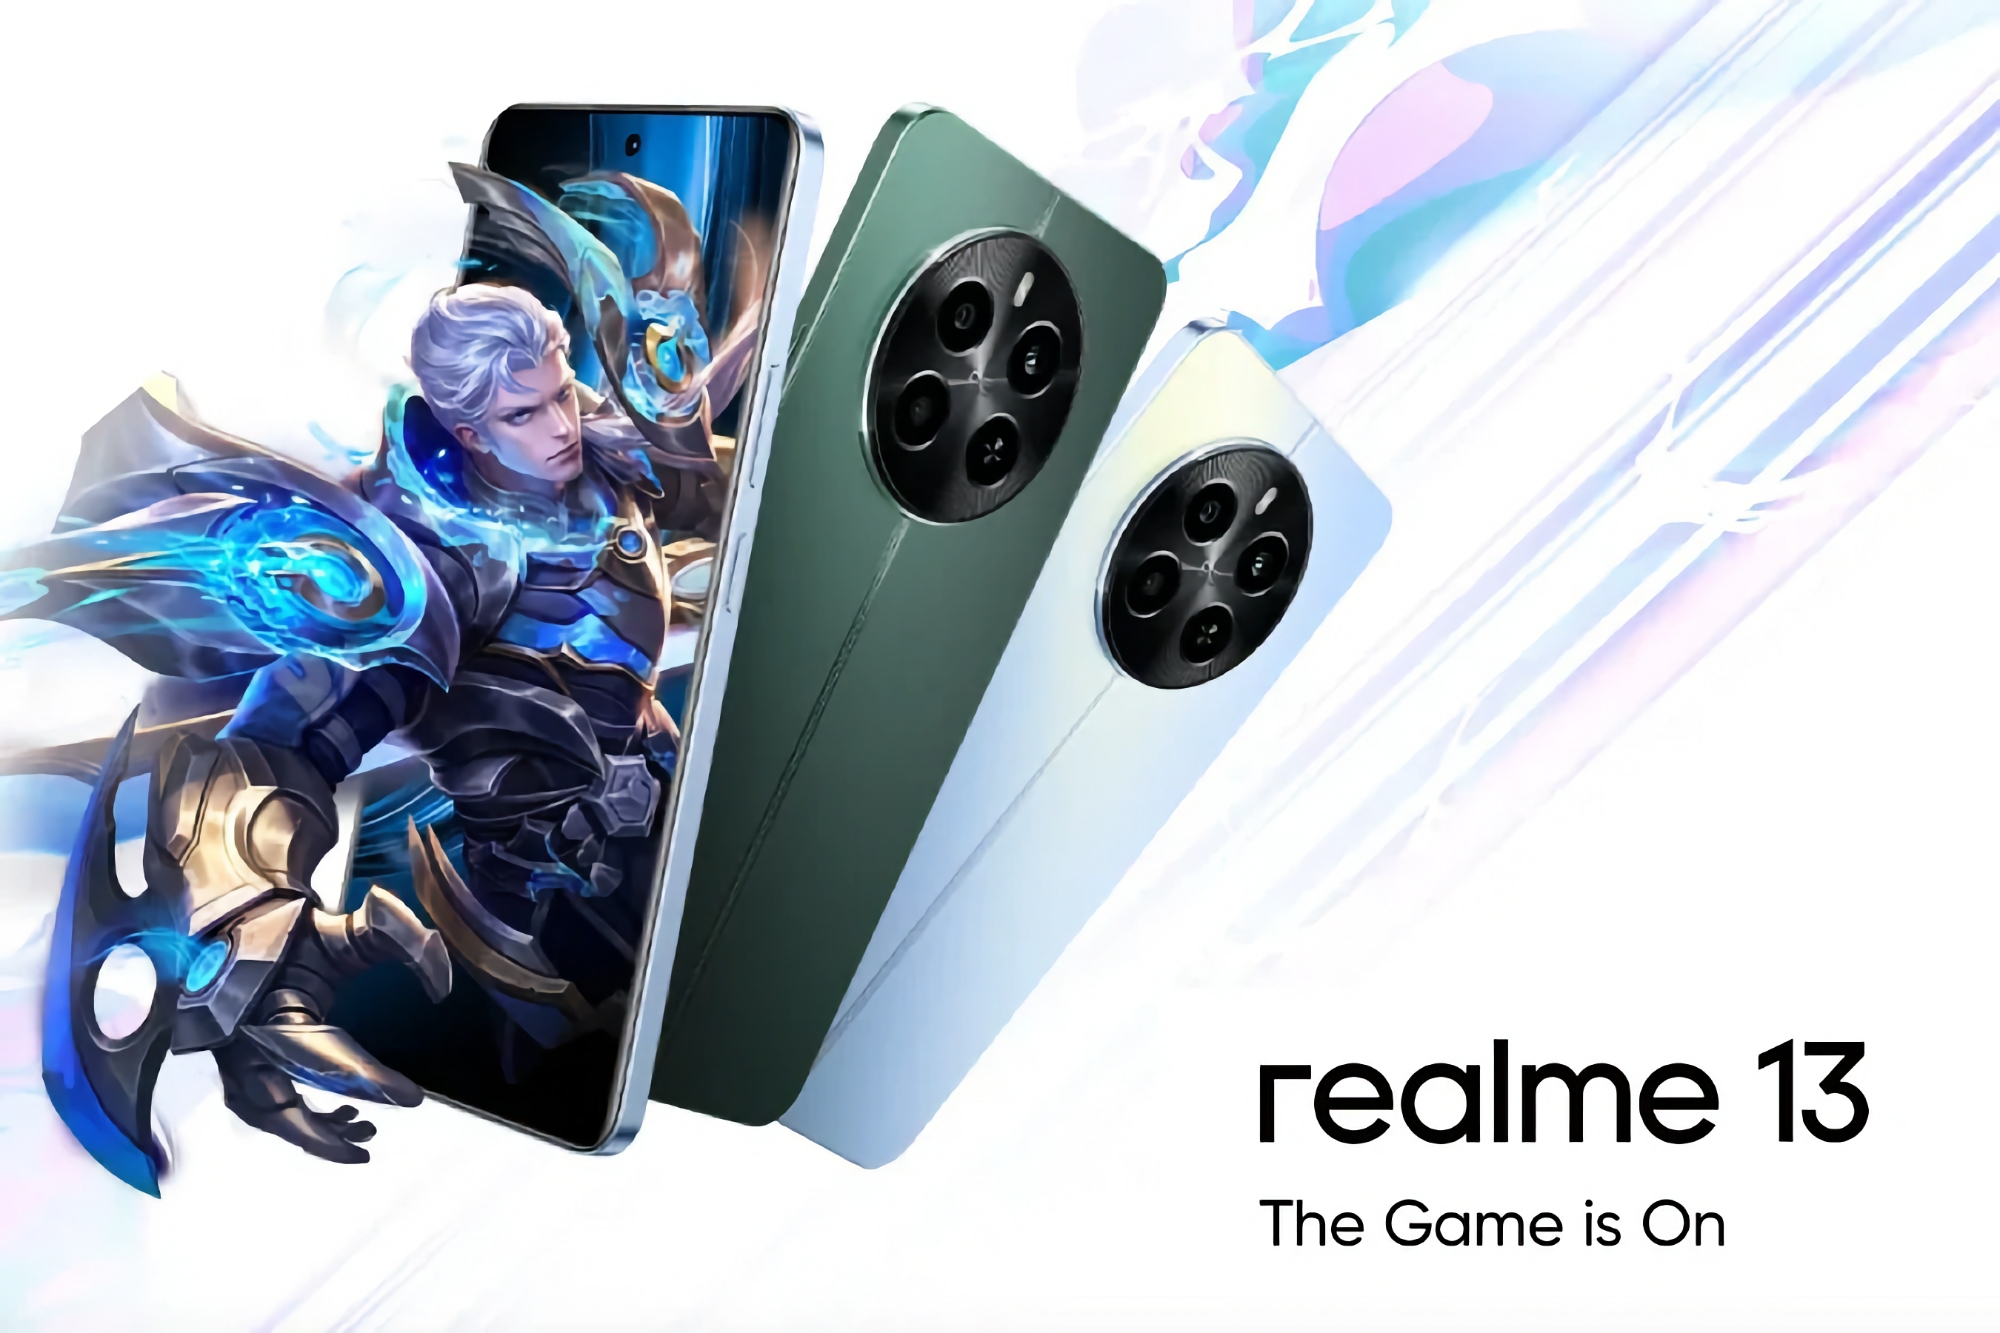 It's official: the realme 13 4G with 120Hz AMOLED screen and Snapdragon 685 chip will debut on 7 August